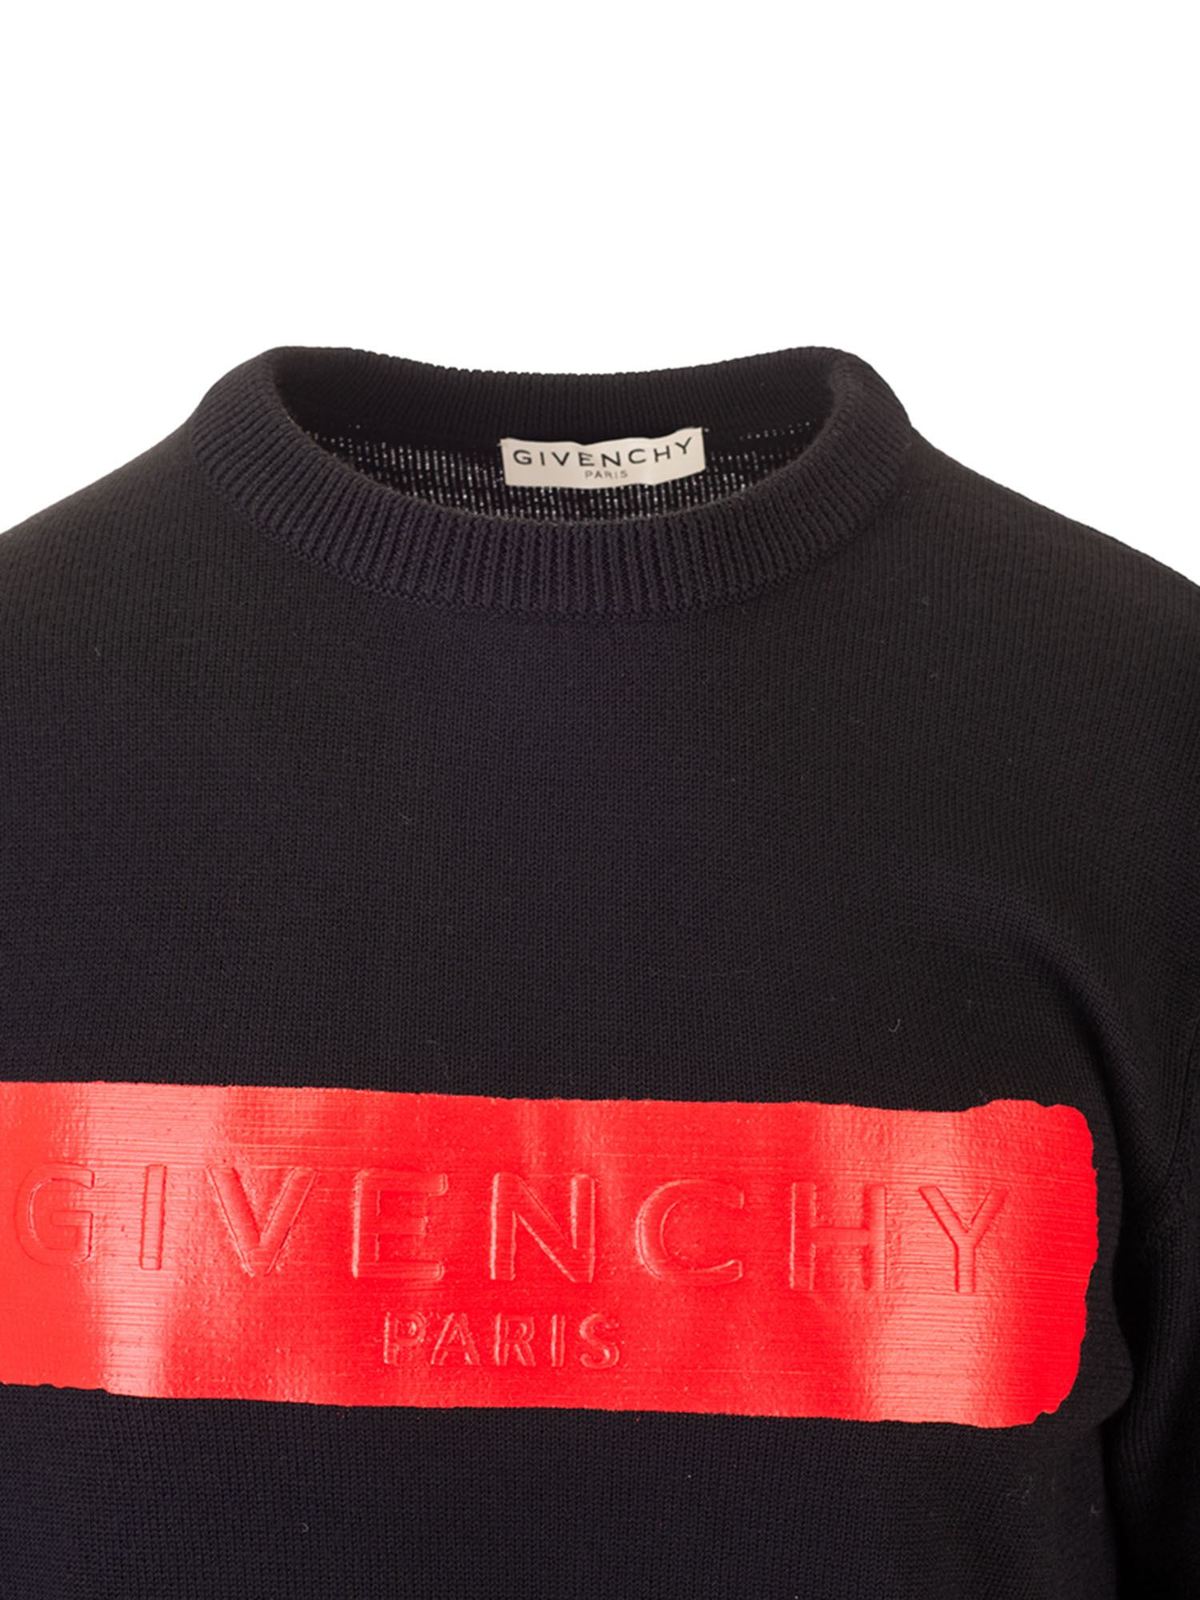 givenchy black pullover